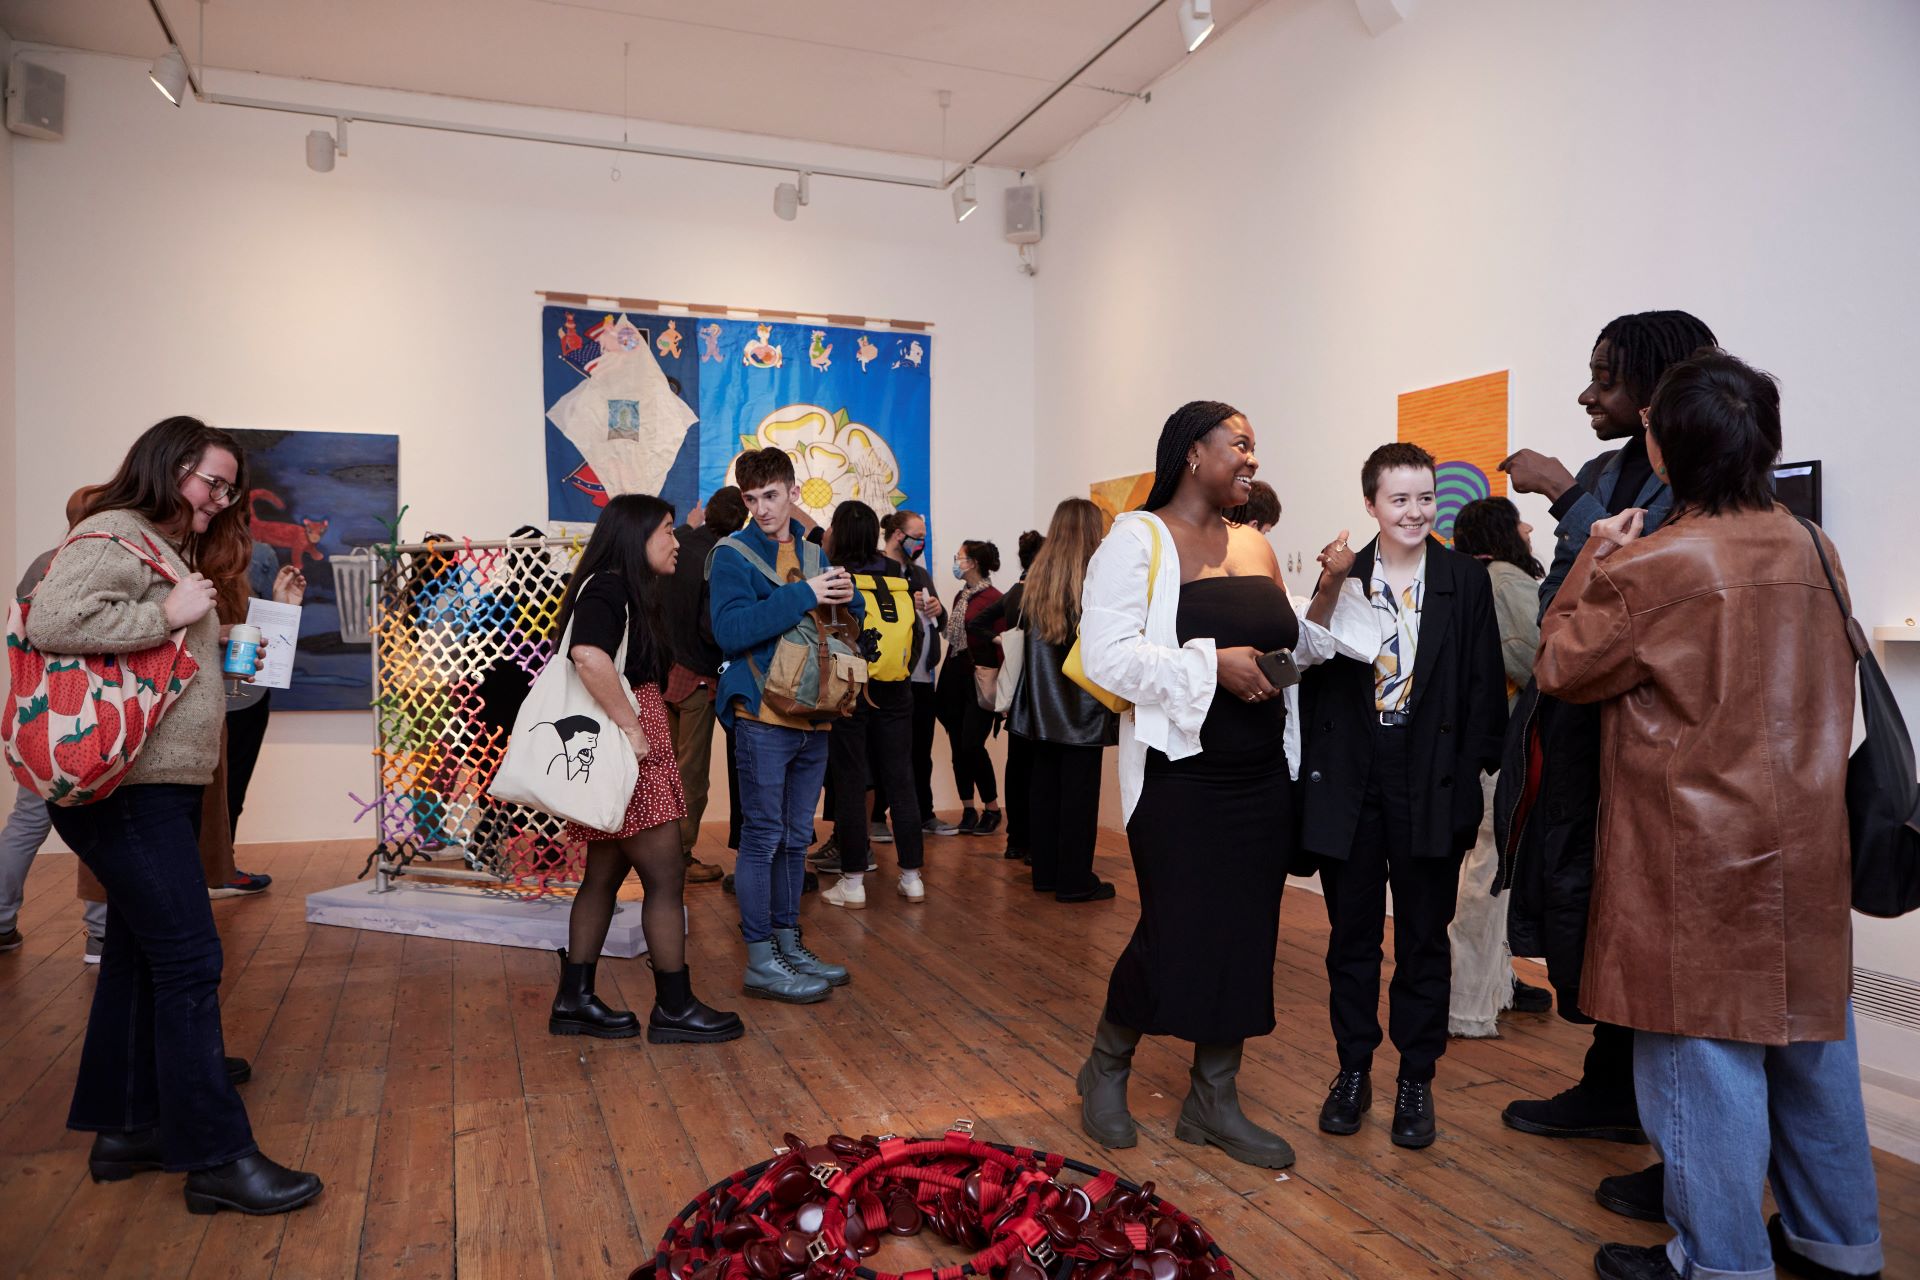 People mingle in the Nunnery Gallery surrounded by artwork